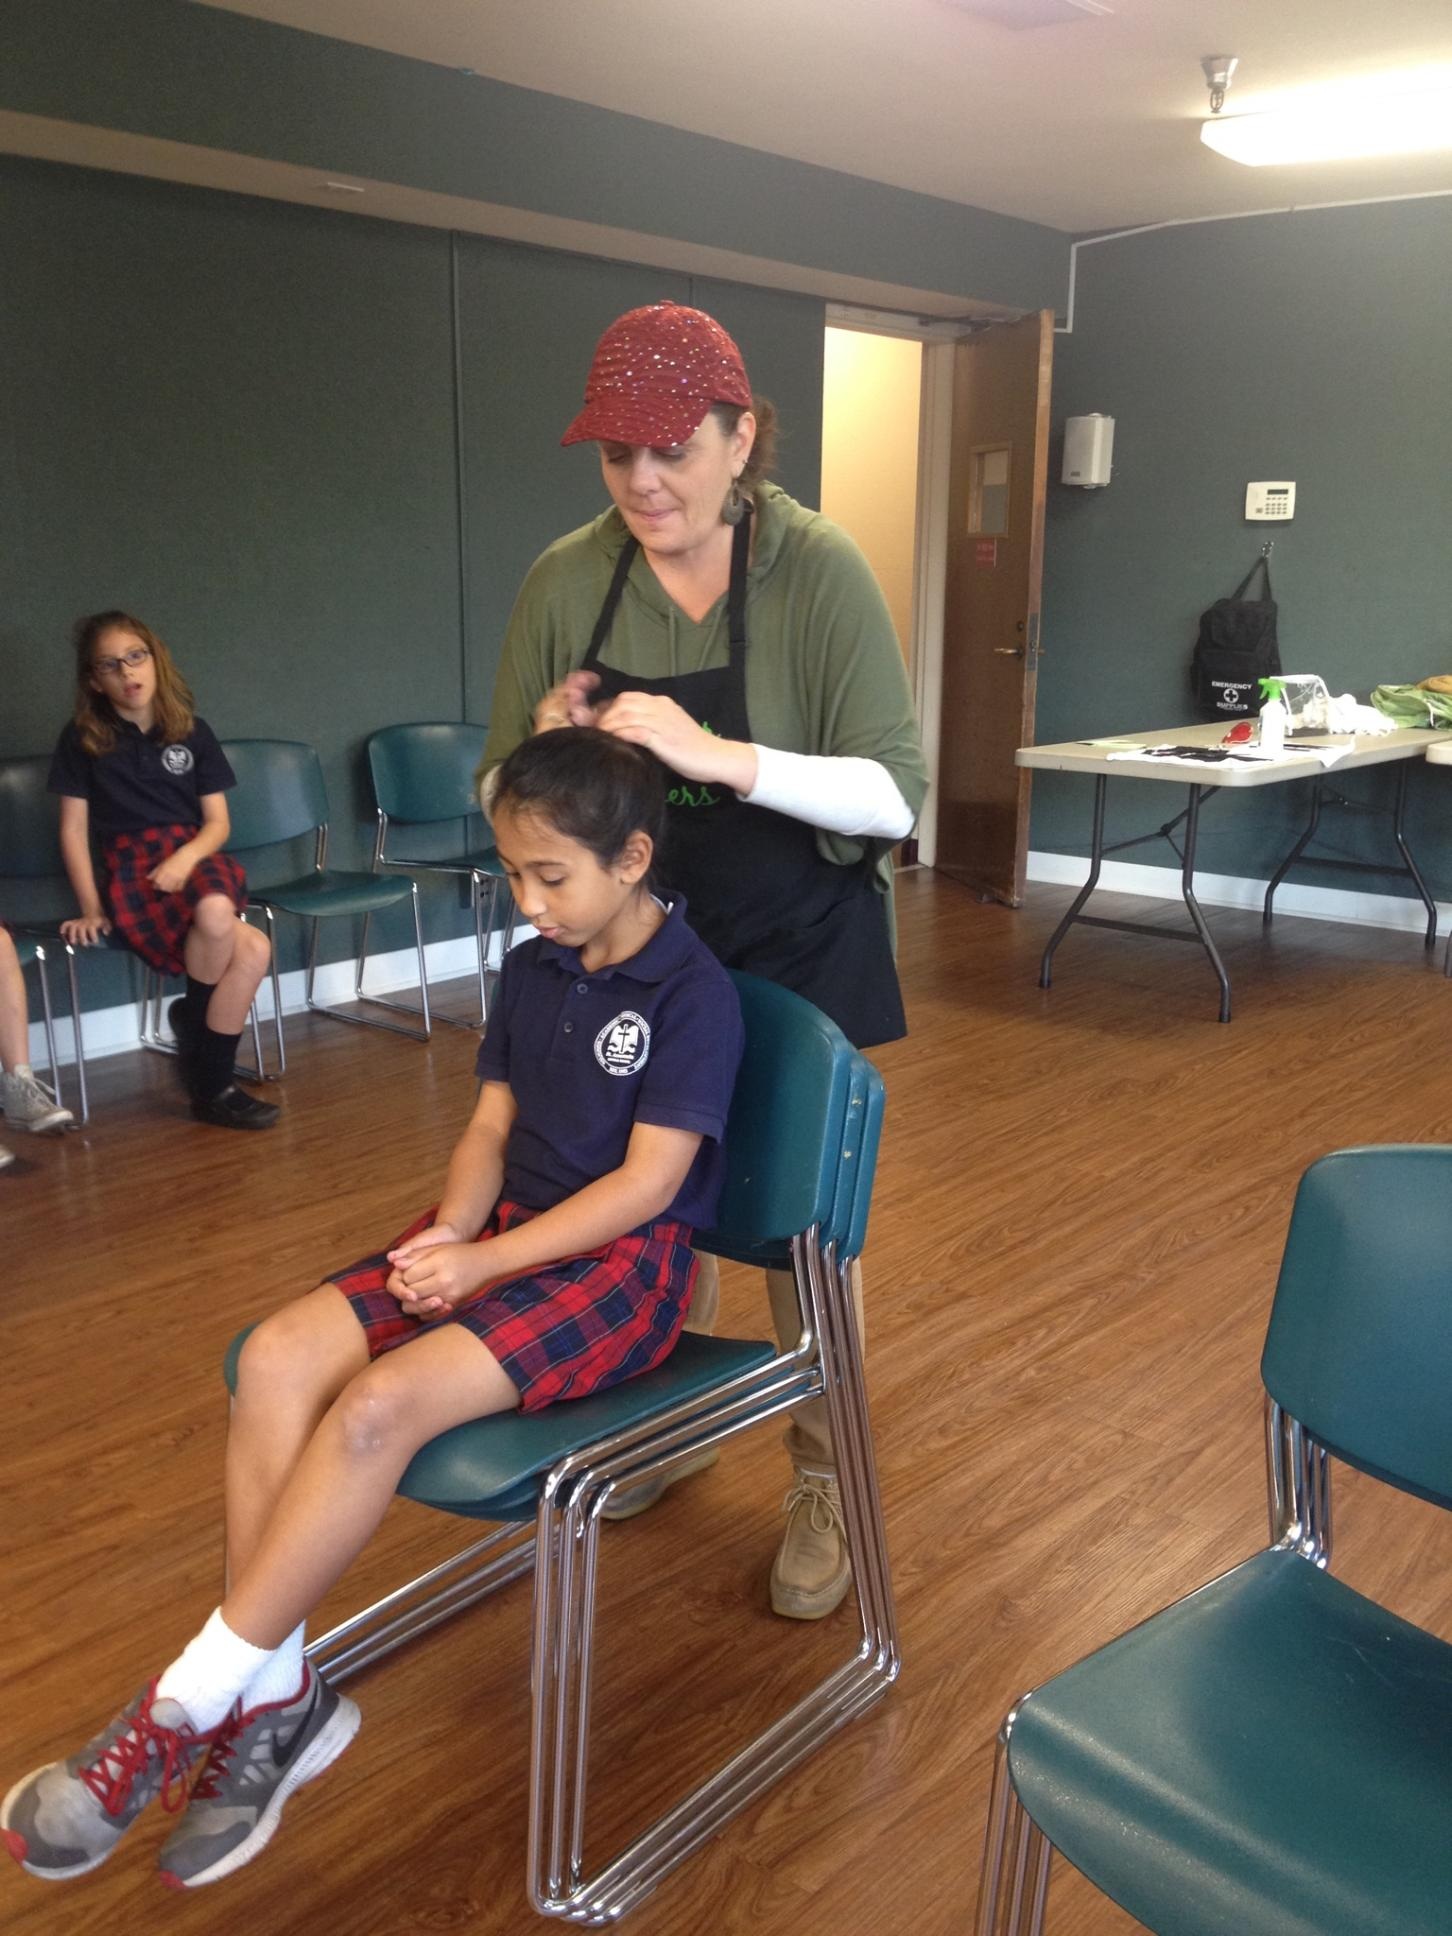 School lice checks in Los Angeles County by My Hair Helpers